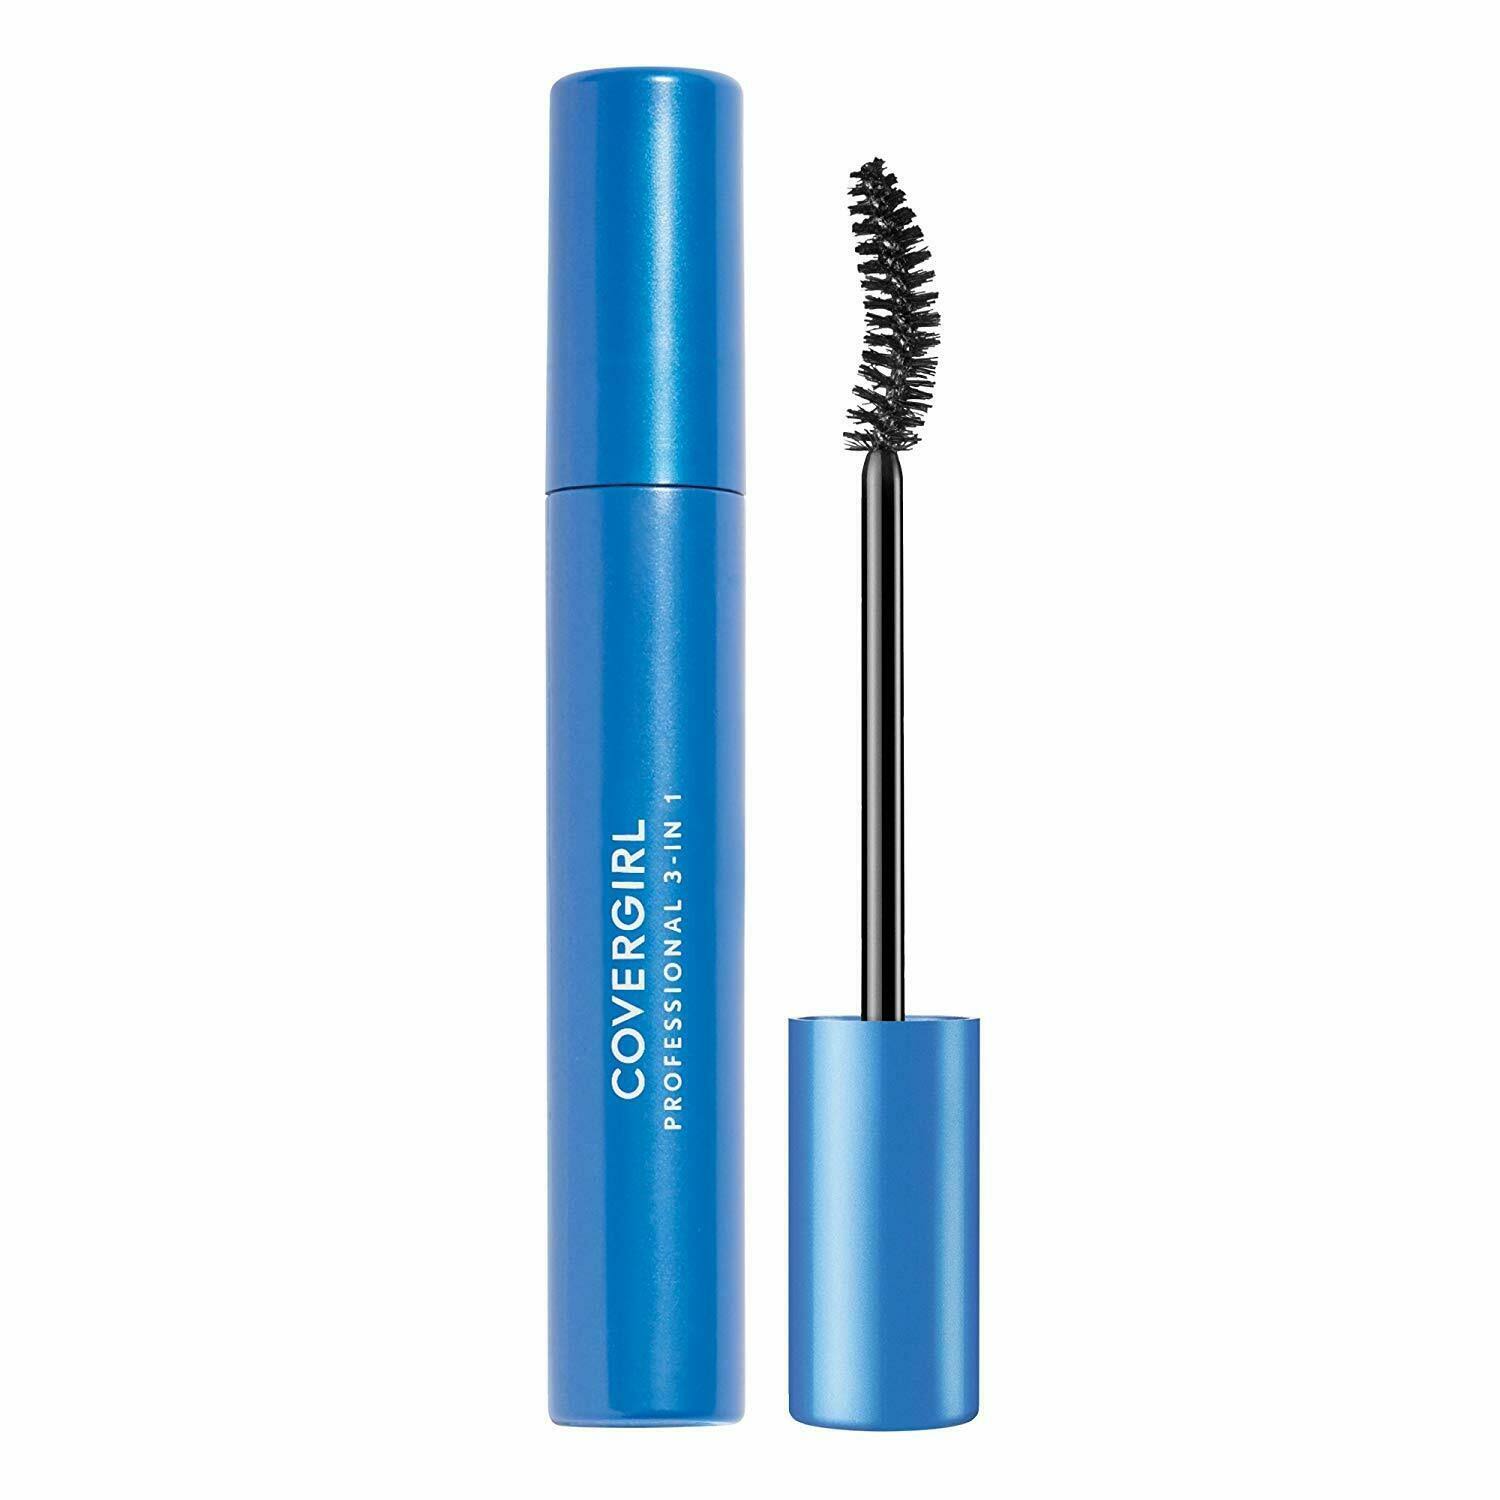 Covergirl Professional 3-In-1 Curved Brush Mascara - 9ml, 200 Very Black